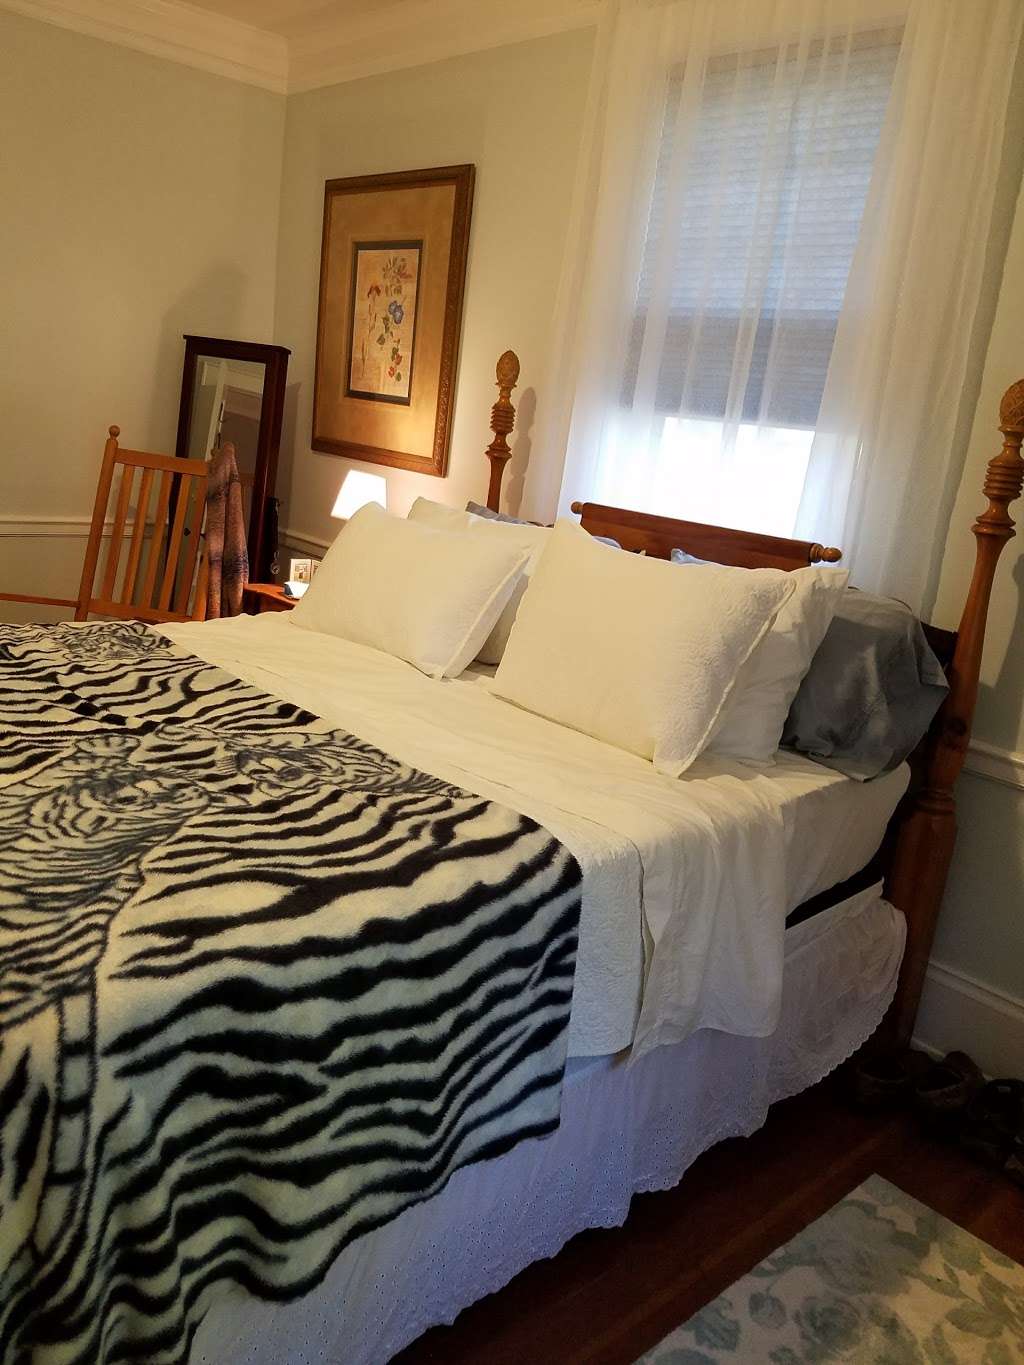 Sweet Tea Bed & Breakfast | 315 6th St SW, Conover, NC 28613 | Phone: (704) 325-3736